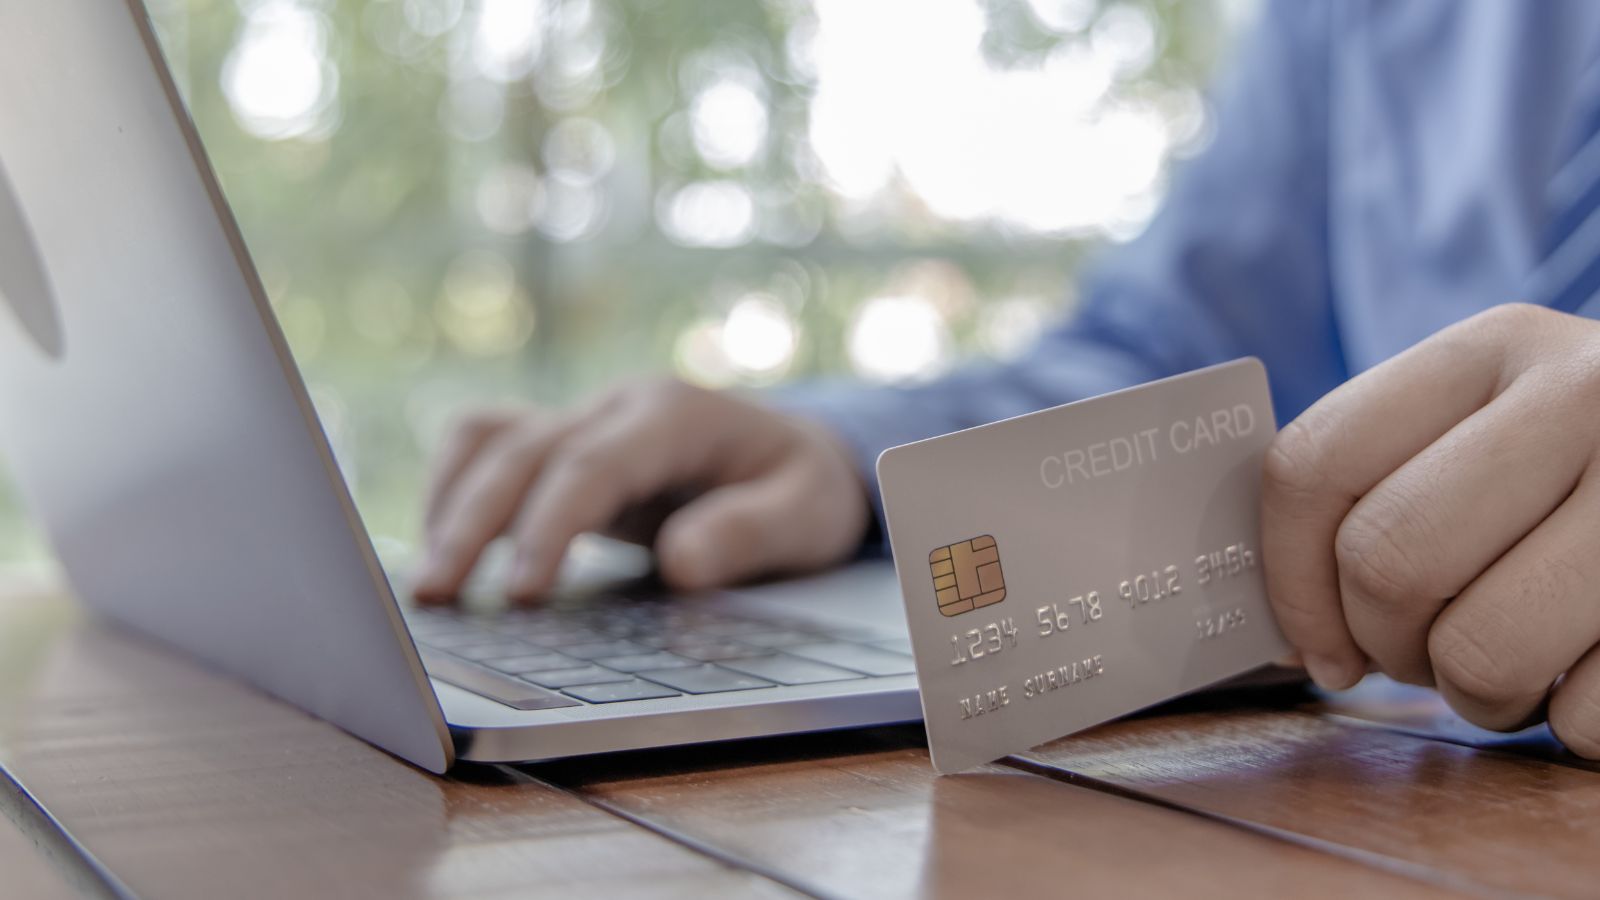 Earn Millions of Points With Chase Credit Cards by Reselling